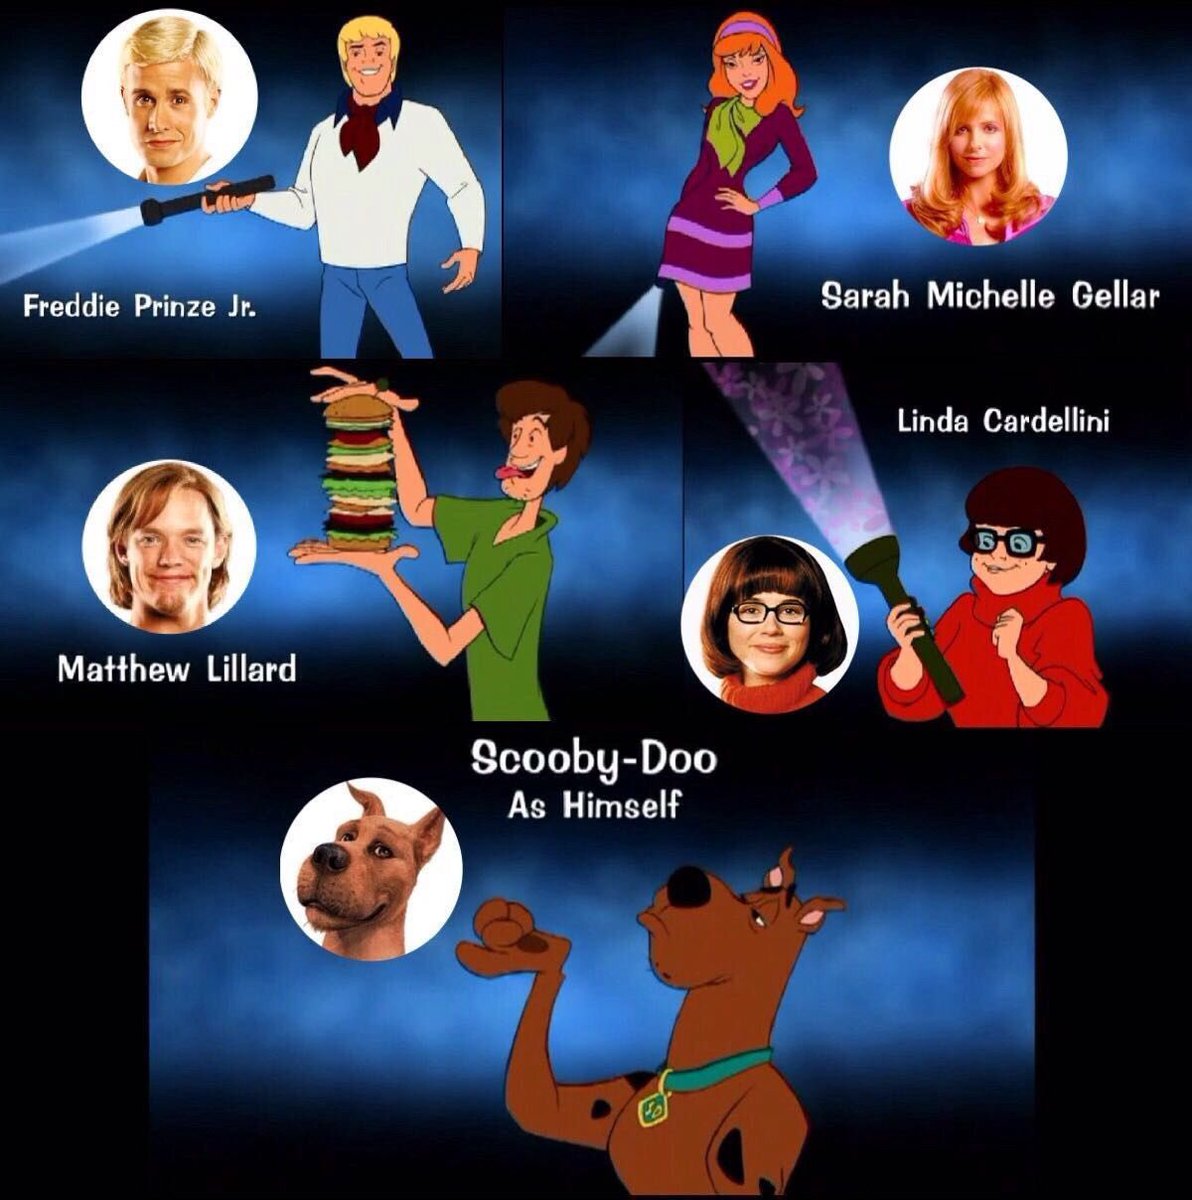 The cast of Scooby-Doo (2002)
#Scoobydoohistory